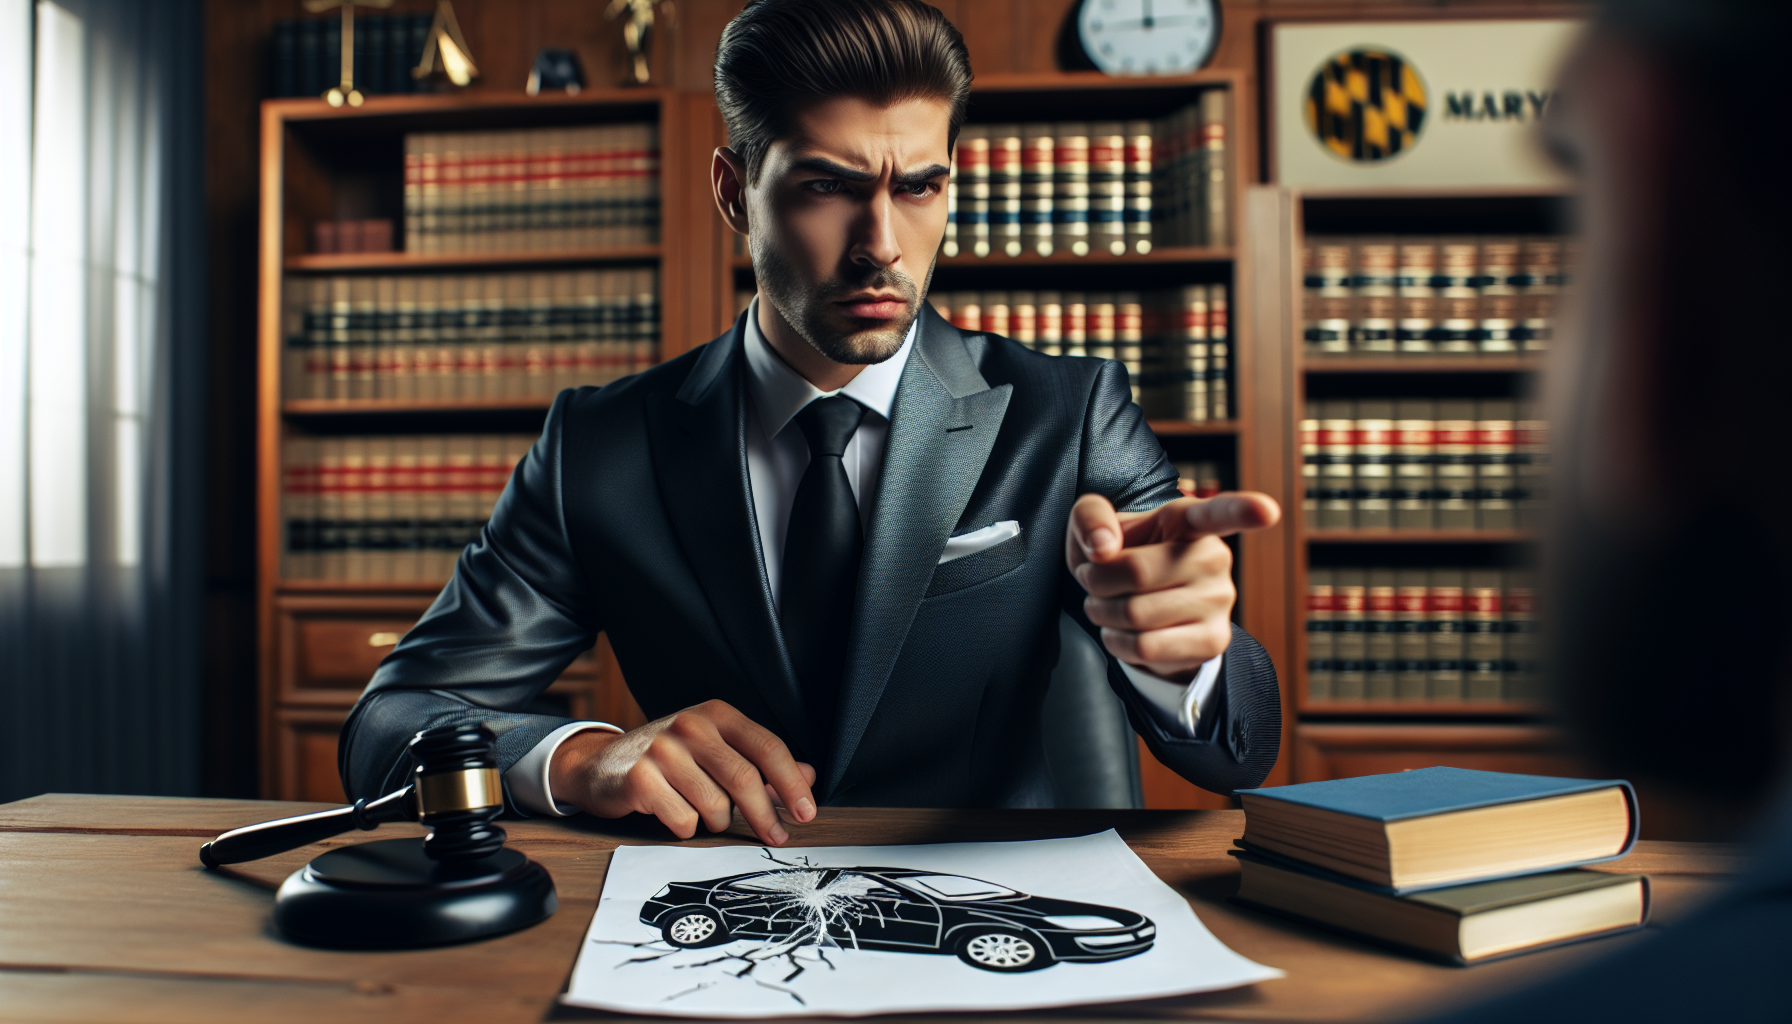 Maryland car accident lawyer providing legal guidance